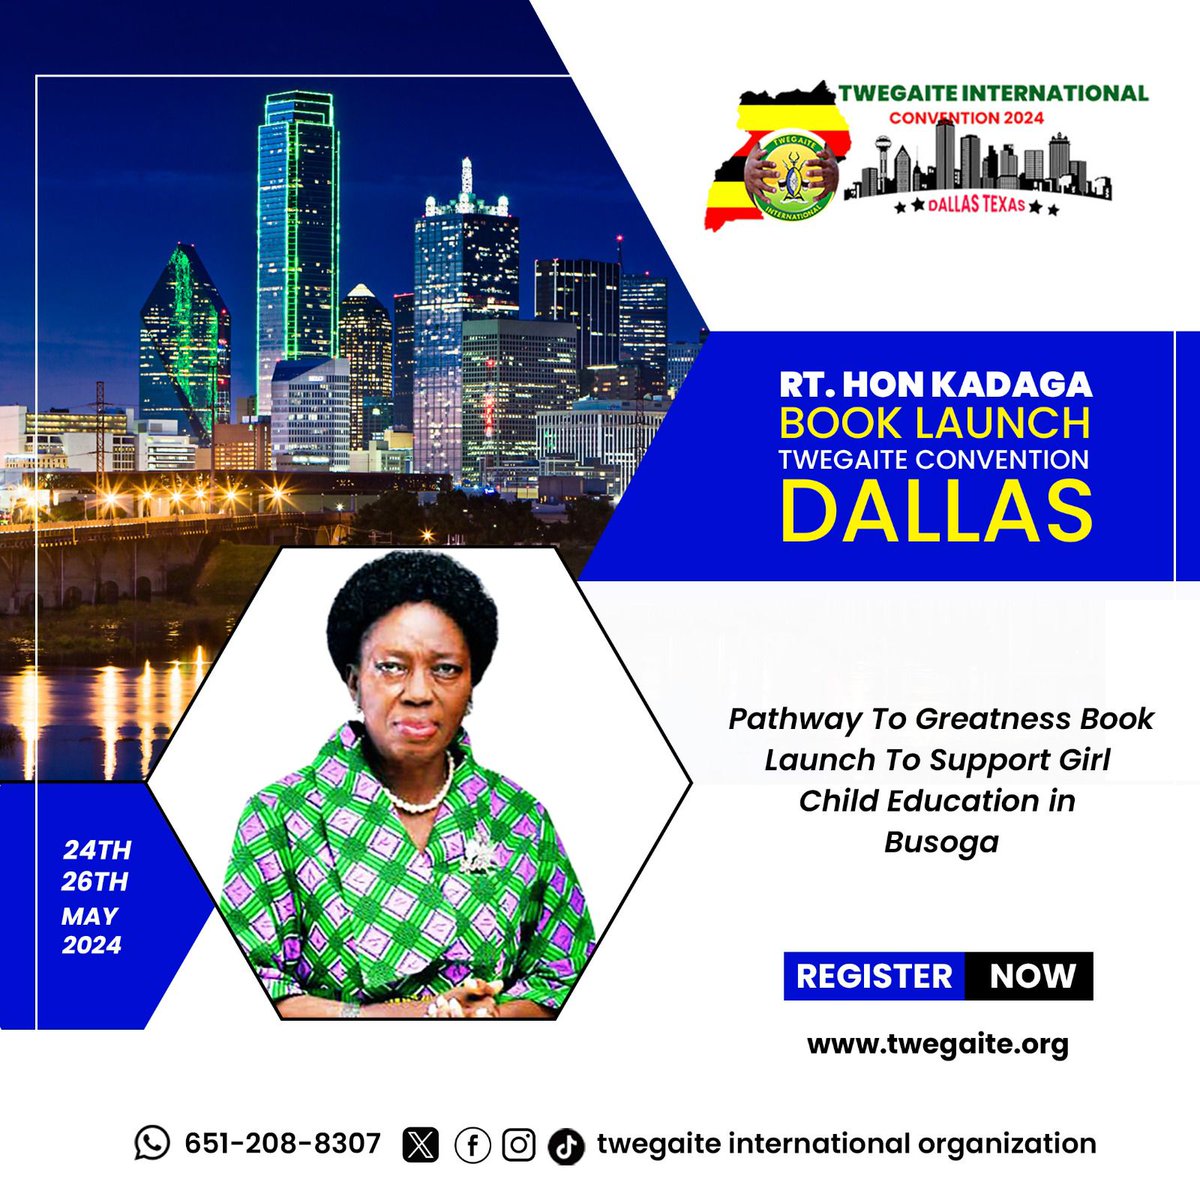 The Rt Hon. Rebecca Kadaga is set to launch her book 📕 , 'Pathway To Greatness', in the United States at the Dallas Twegaite International Convention from the 24th to the 26th of May 2024. The book launch is poised to be a phenomenal event, with all proceeds dedicated to